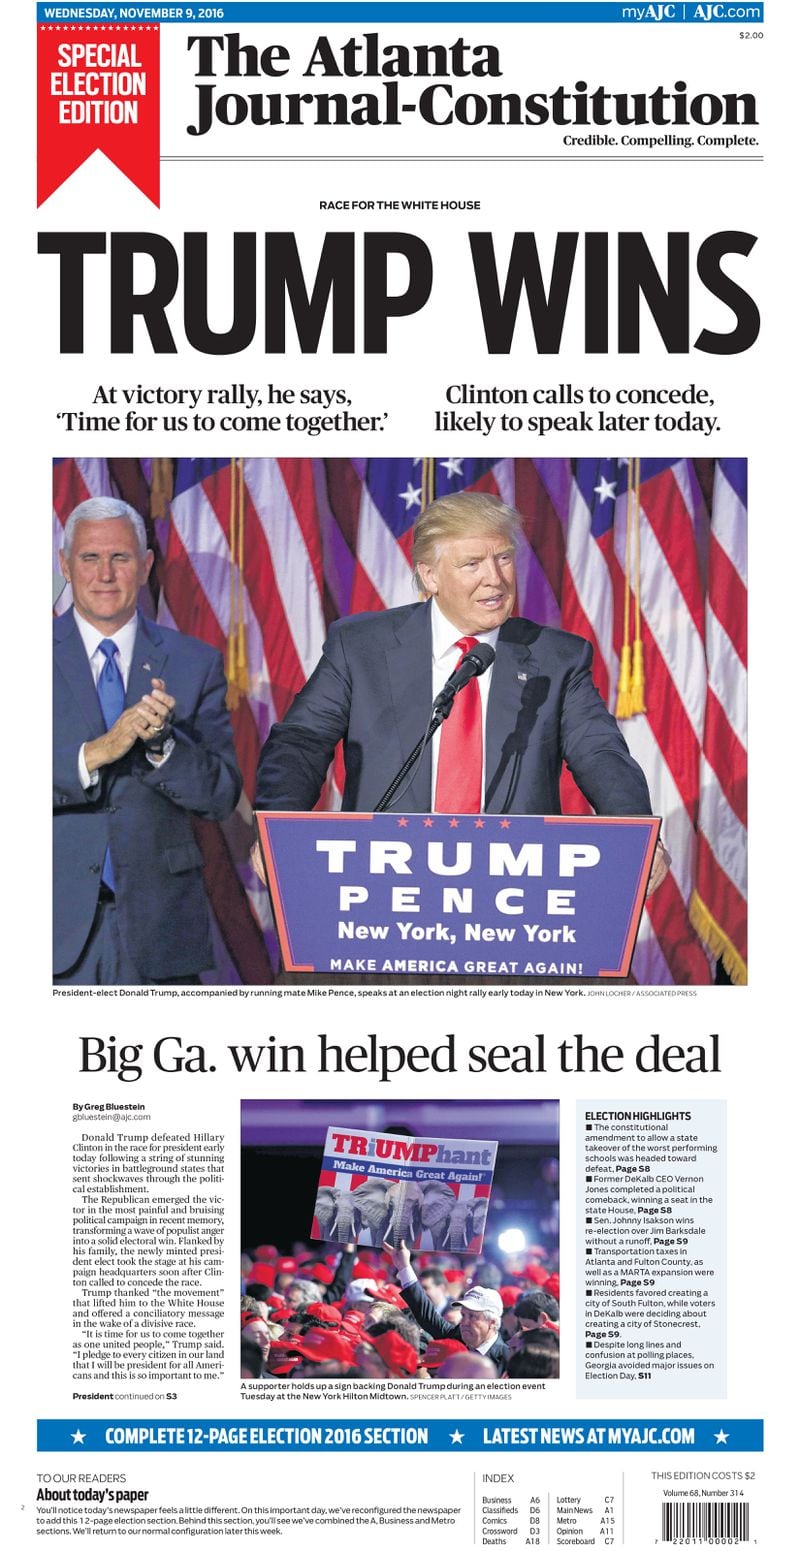 The front page of the November 9, 2016 print edition of The Atlanta Journal-Constitution. The 2016 presidential election was still to close to call as The AJC presses began rolling. The AJC will print a special commemorative edition with complete election results on Thursday.